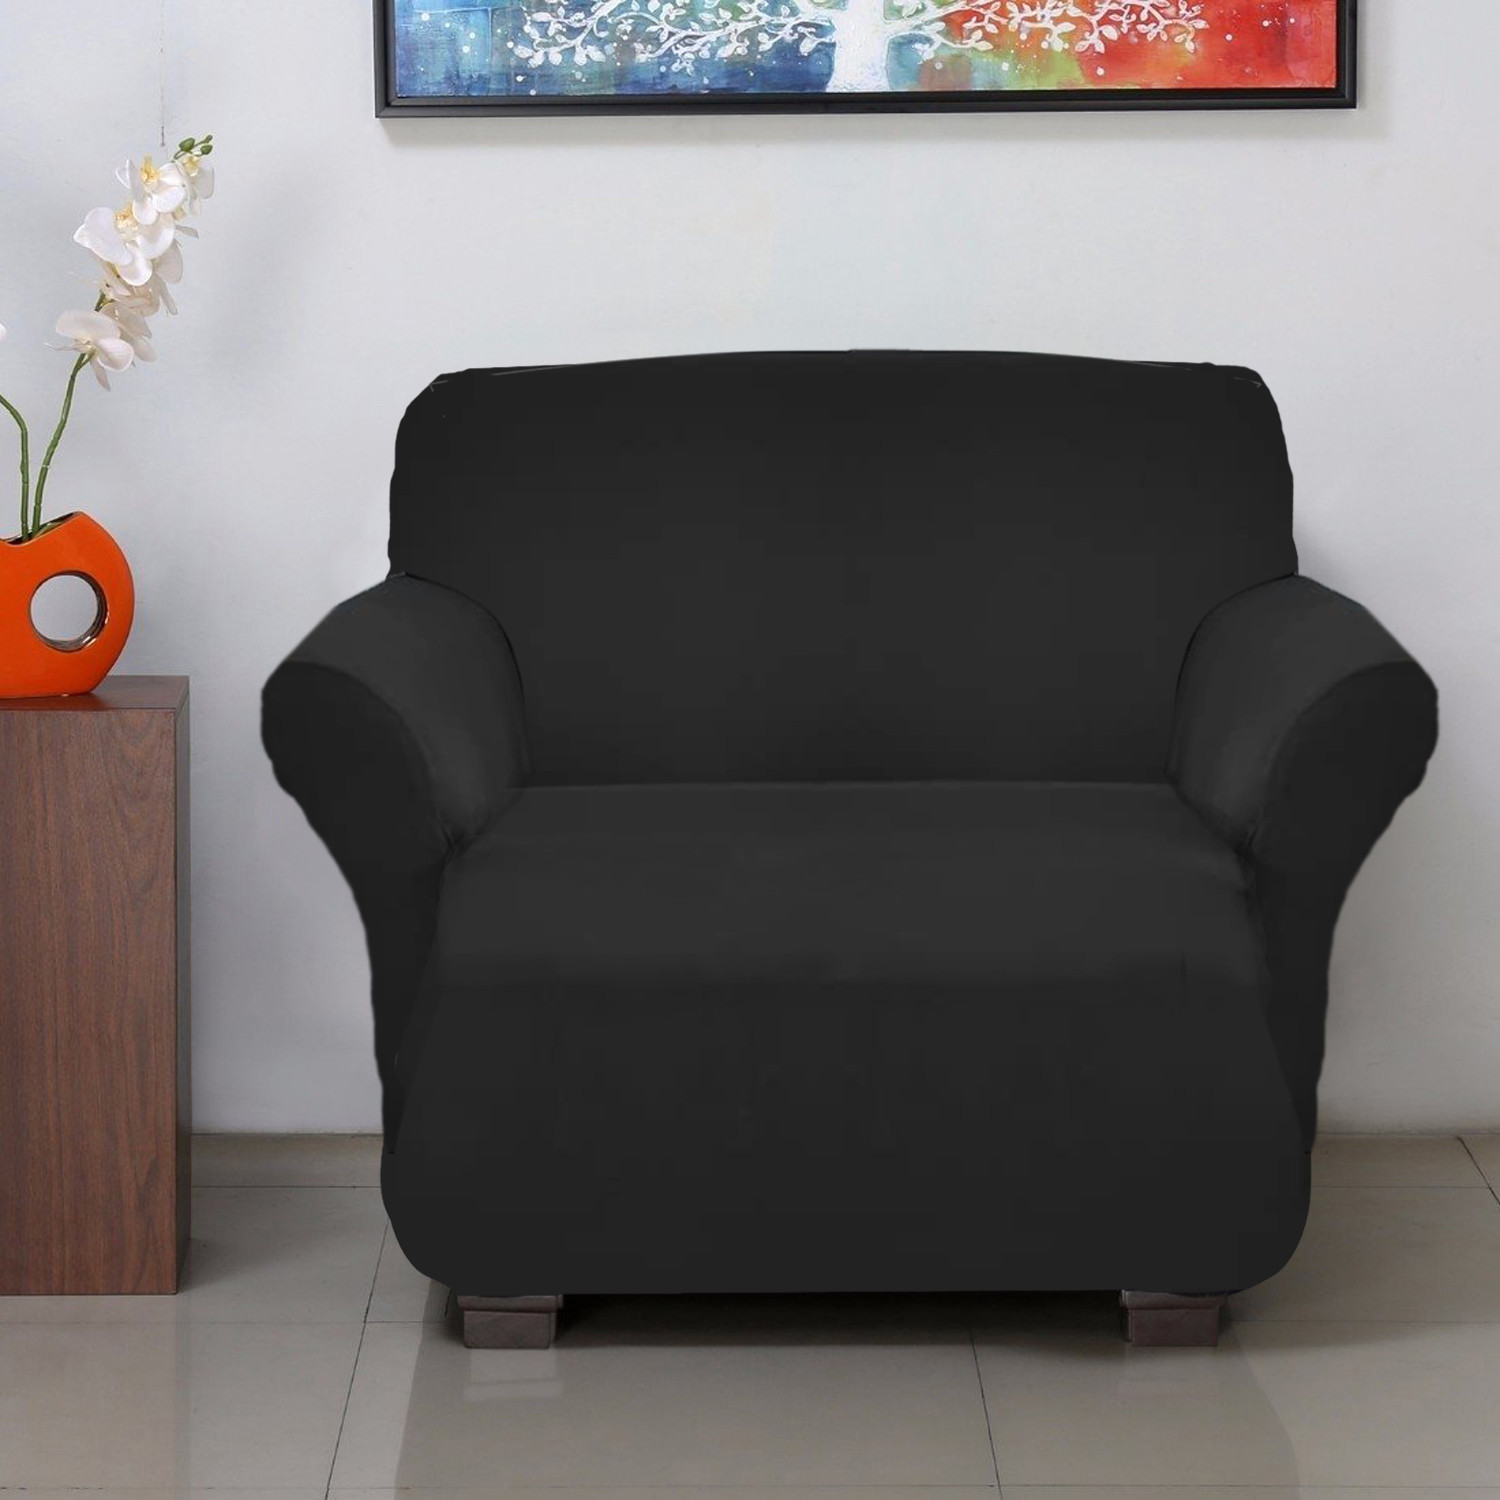 Kuber Industries Stretchable, Non-Slip Polyster 1 Seater Sofa & Chair Cover Set, Set of 2 (Black)